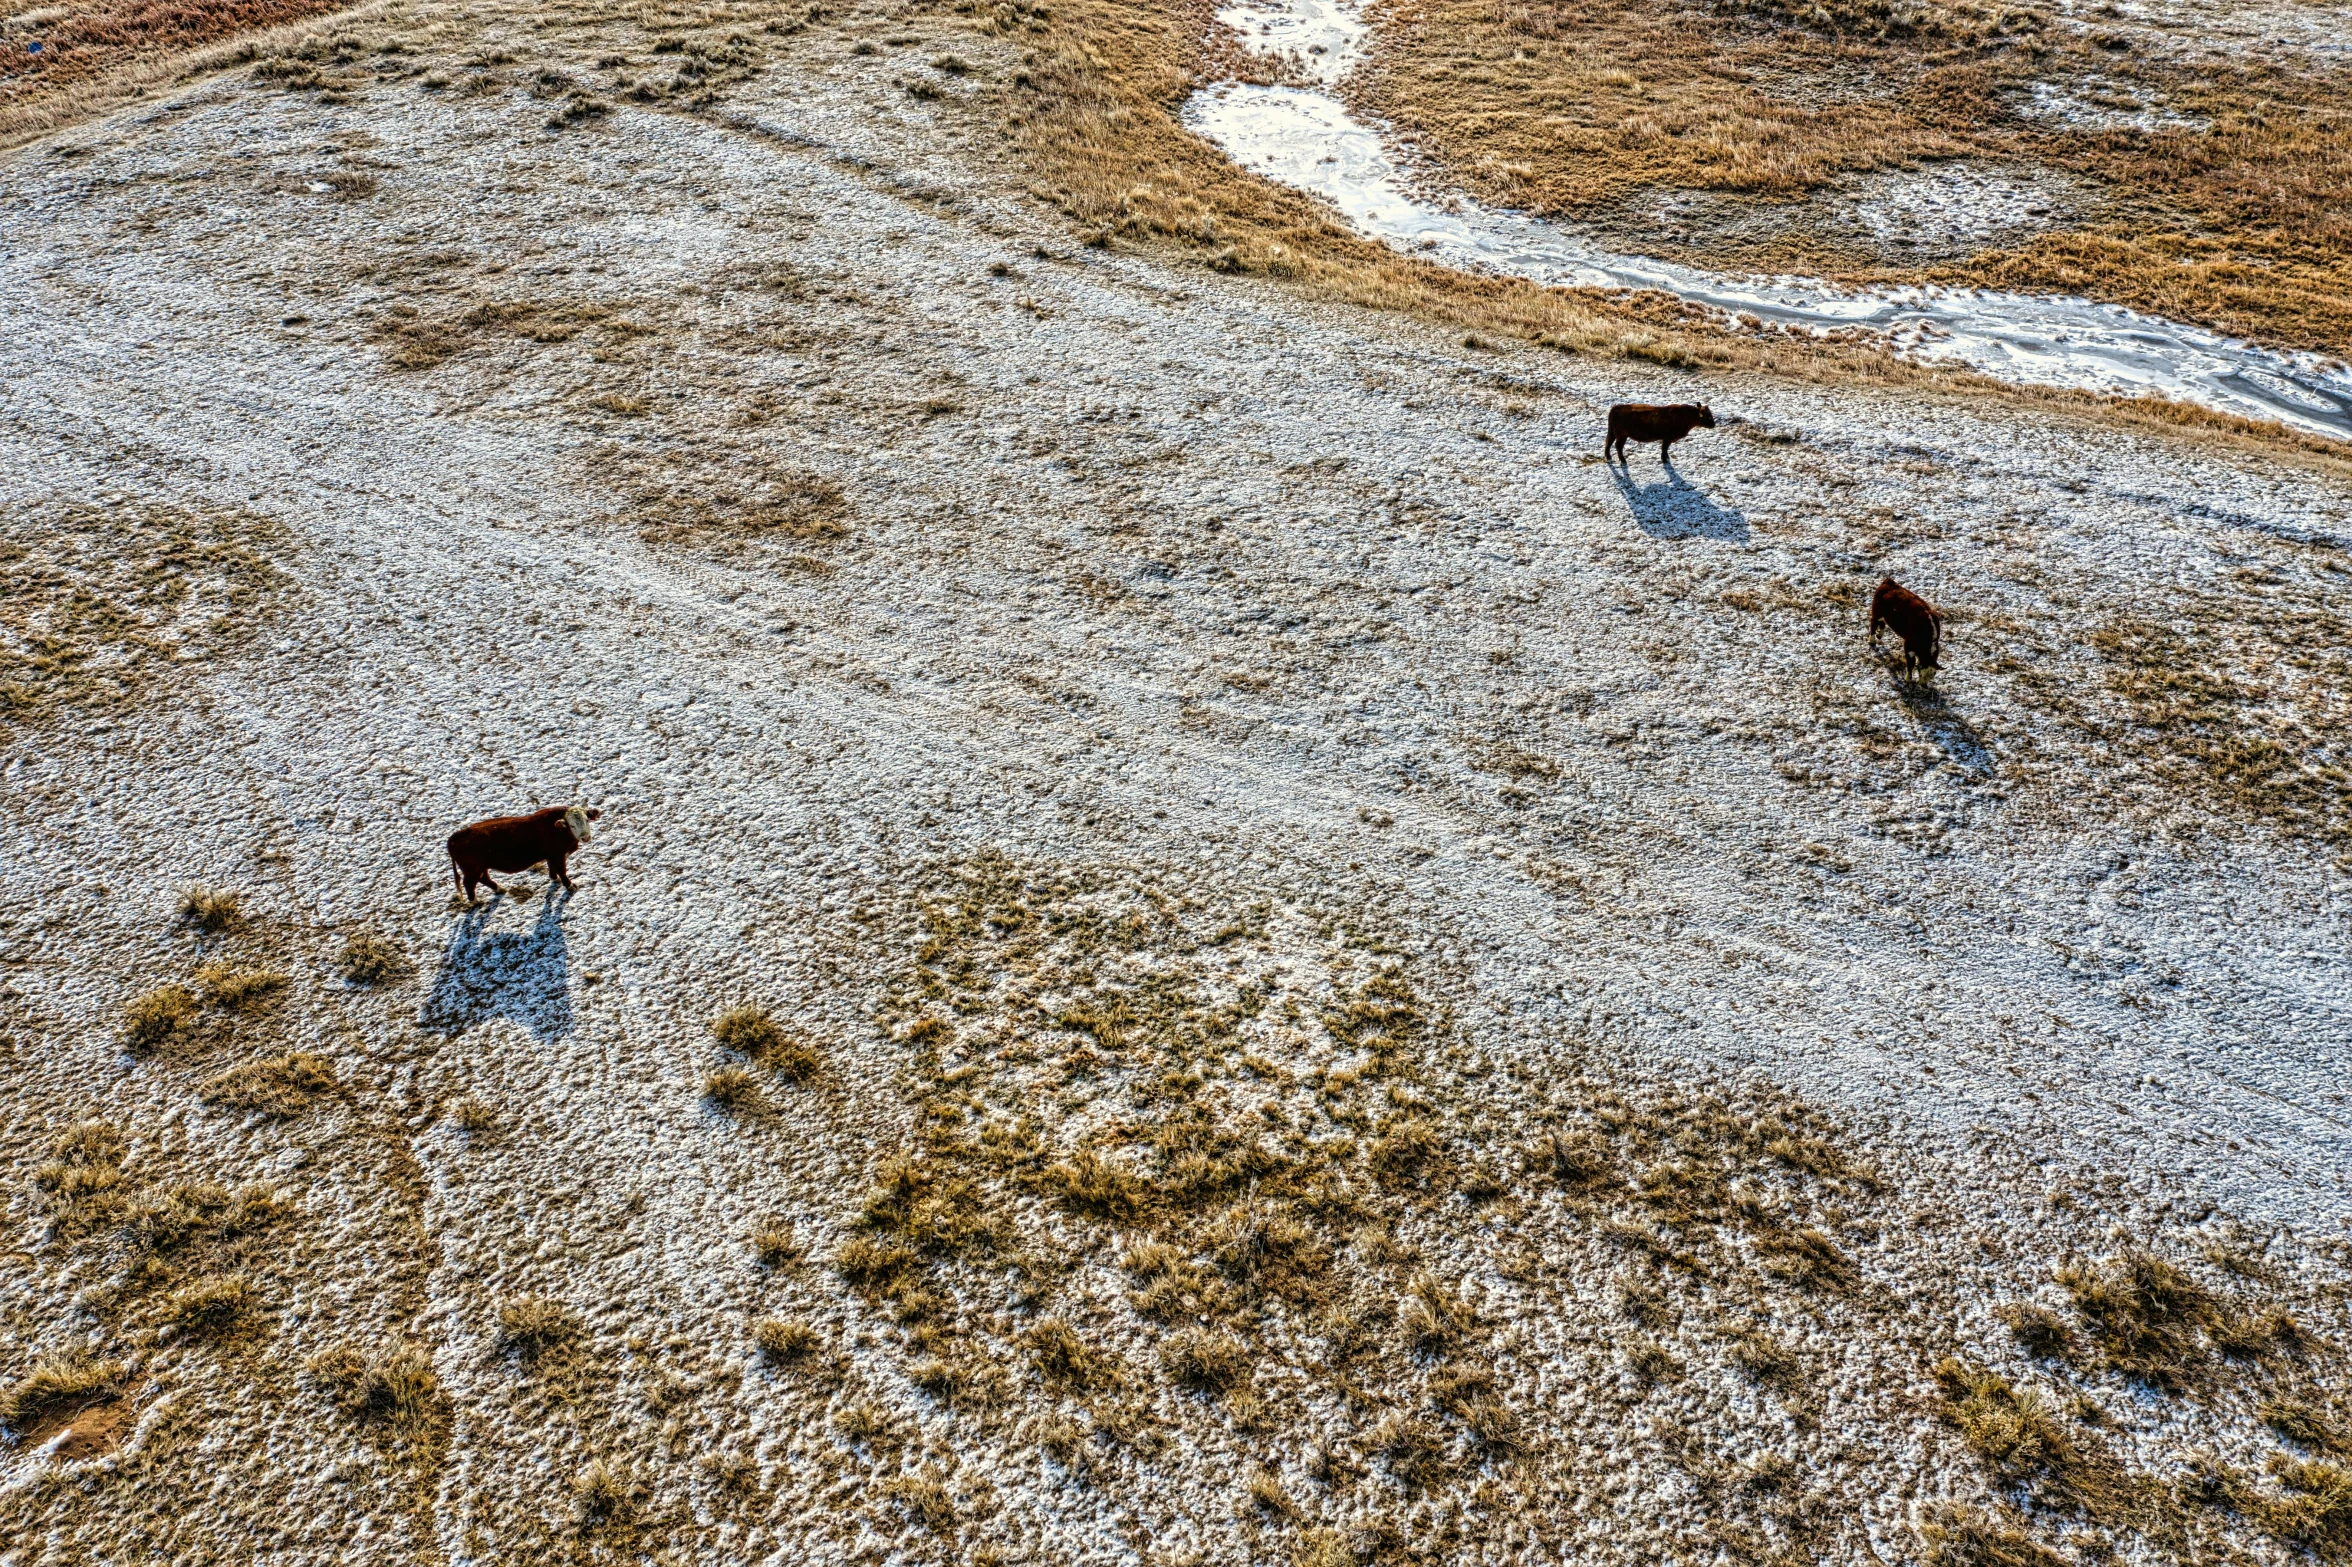 a herd of cattle walking across a dry grass covered field, by Jan Rustem, unsplash, land art, spring winter nature melted snow, drone photograpghy, three animals, high shadows